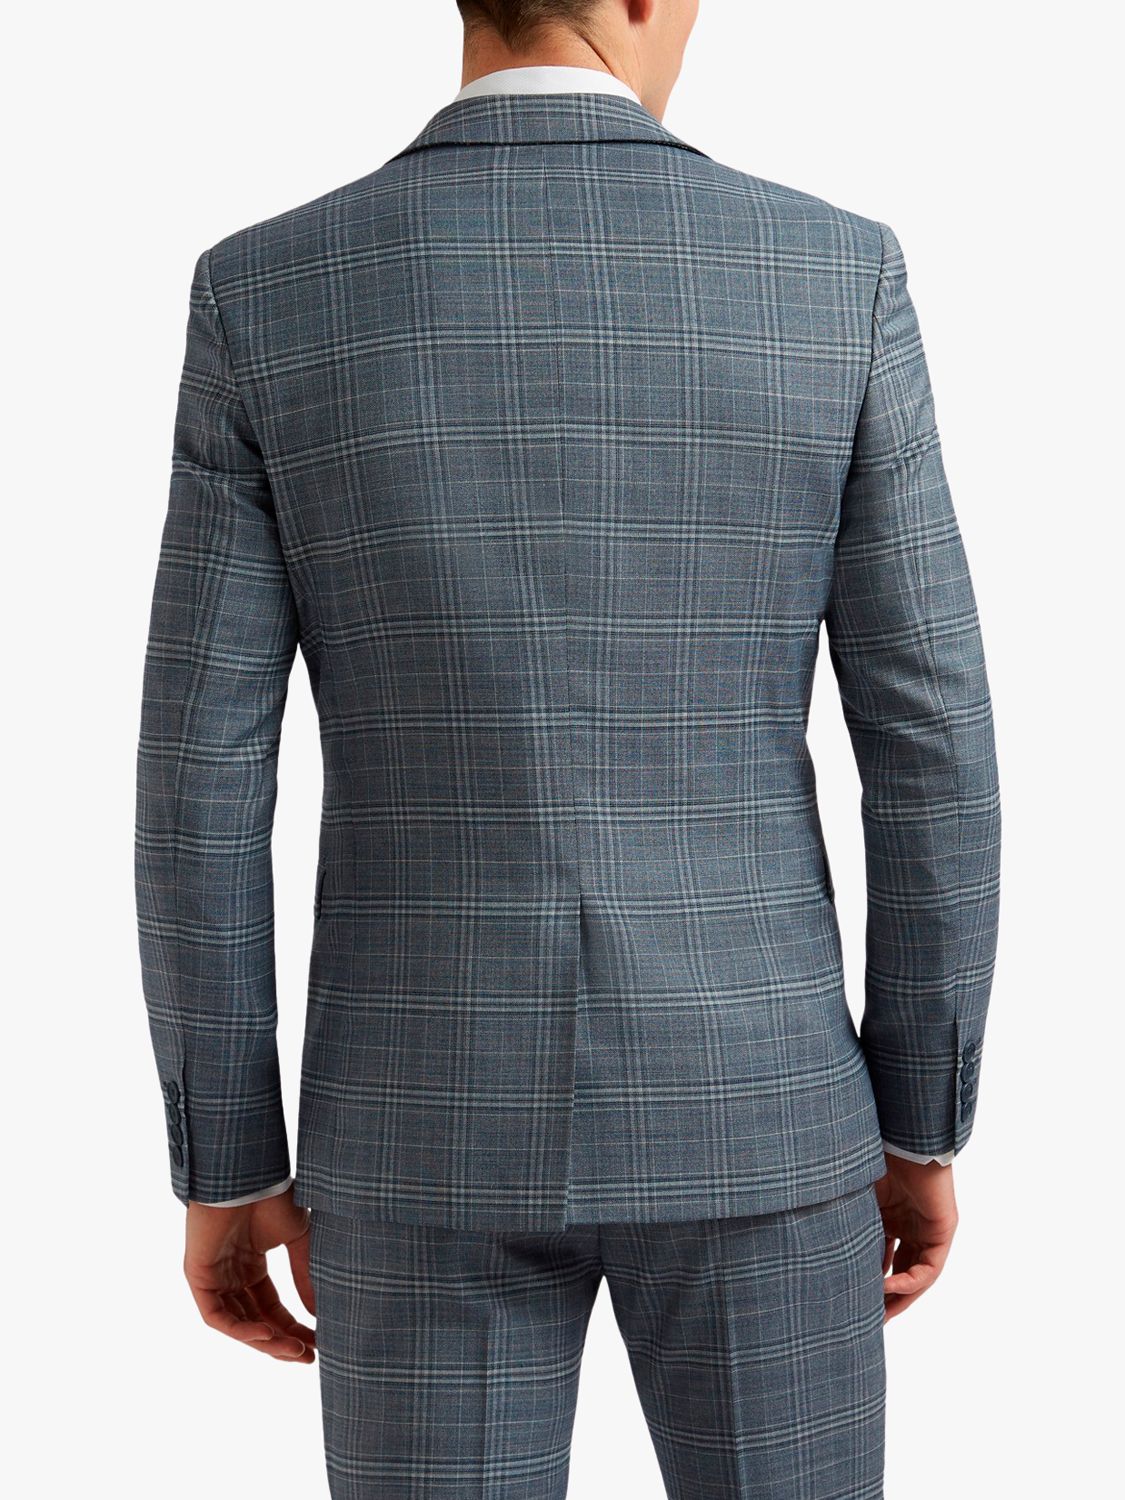 Ted Baker Check Wool Blend Suit Jacket, 150 Dusty Blue Chk at John ...